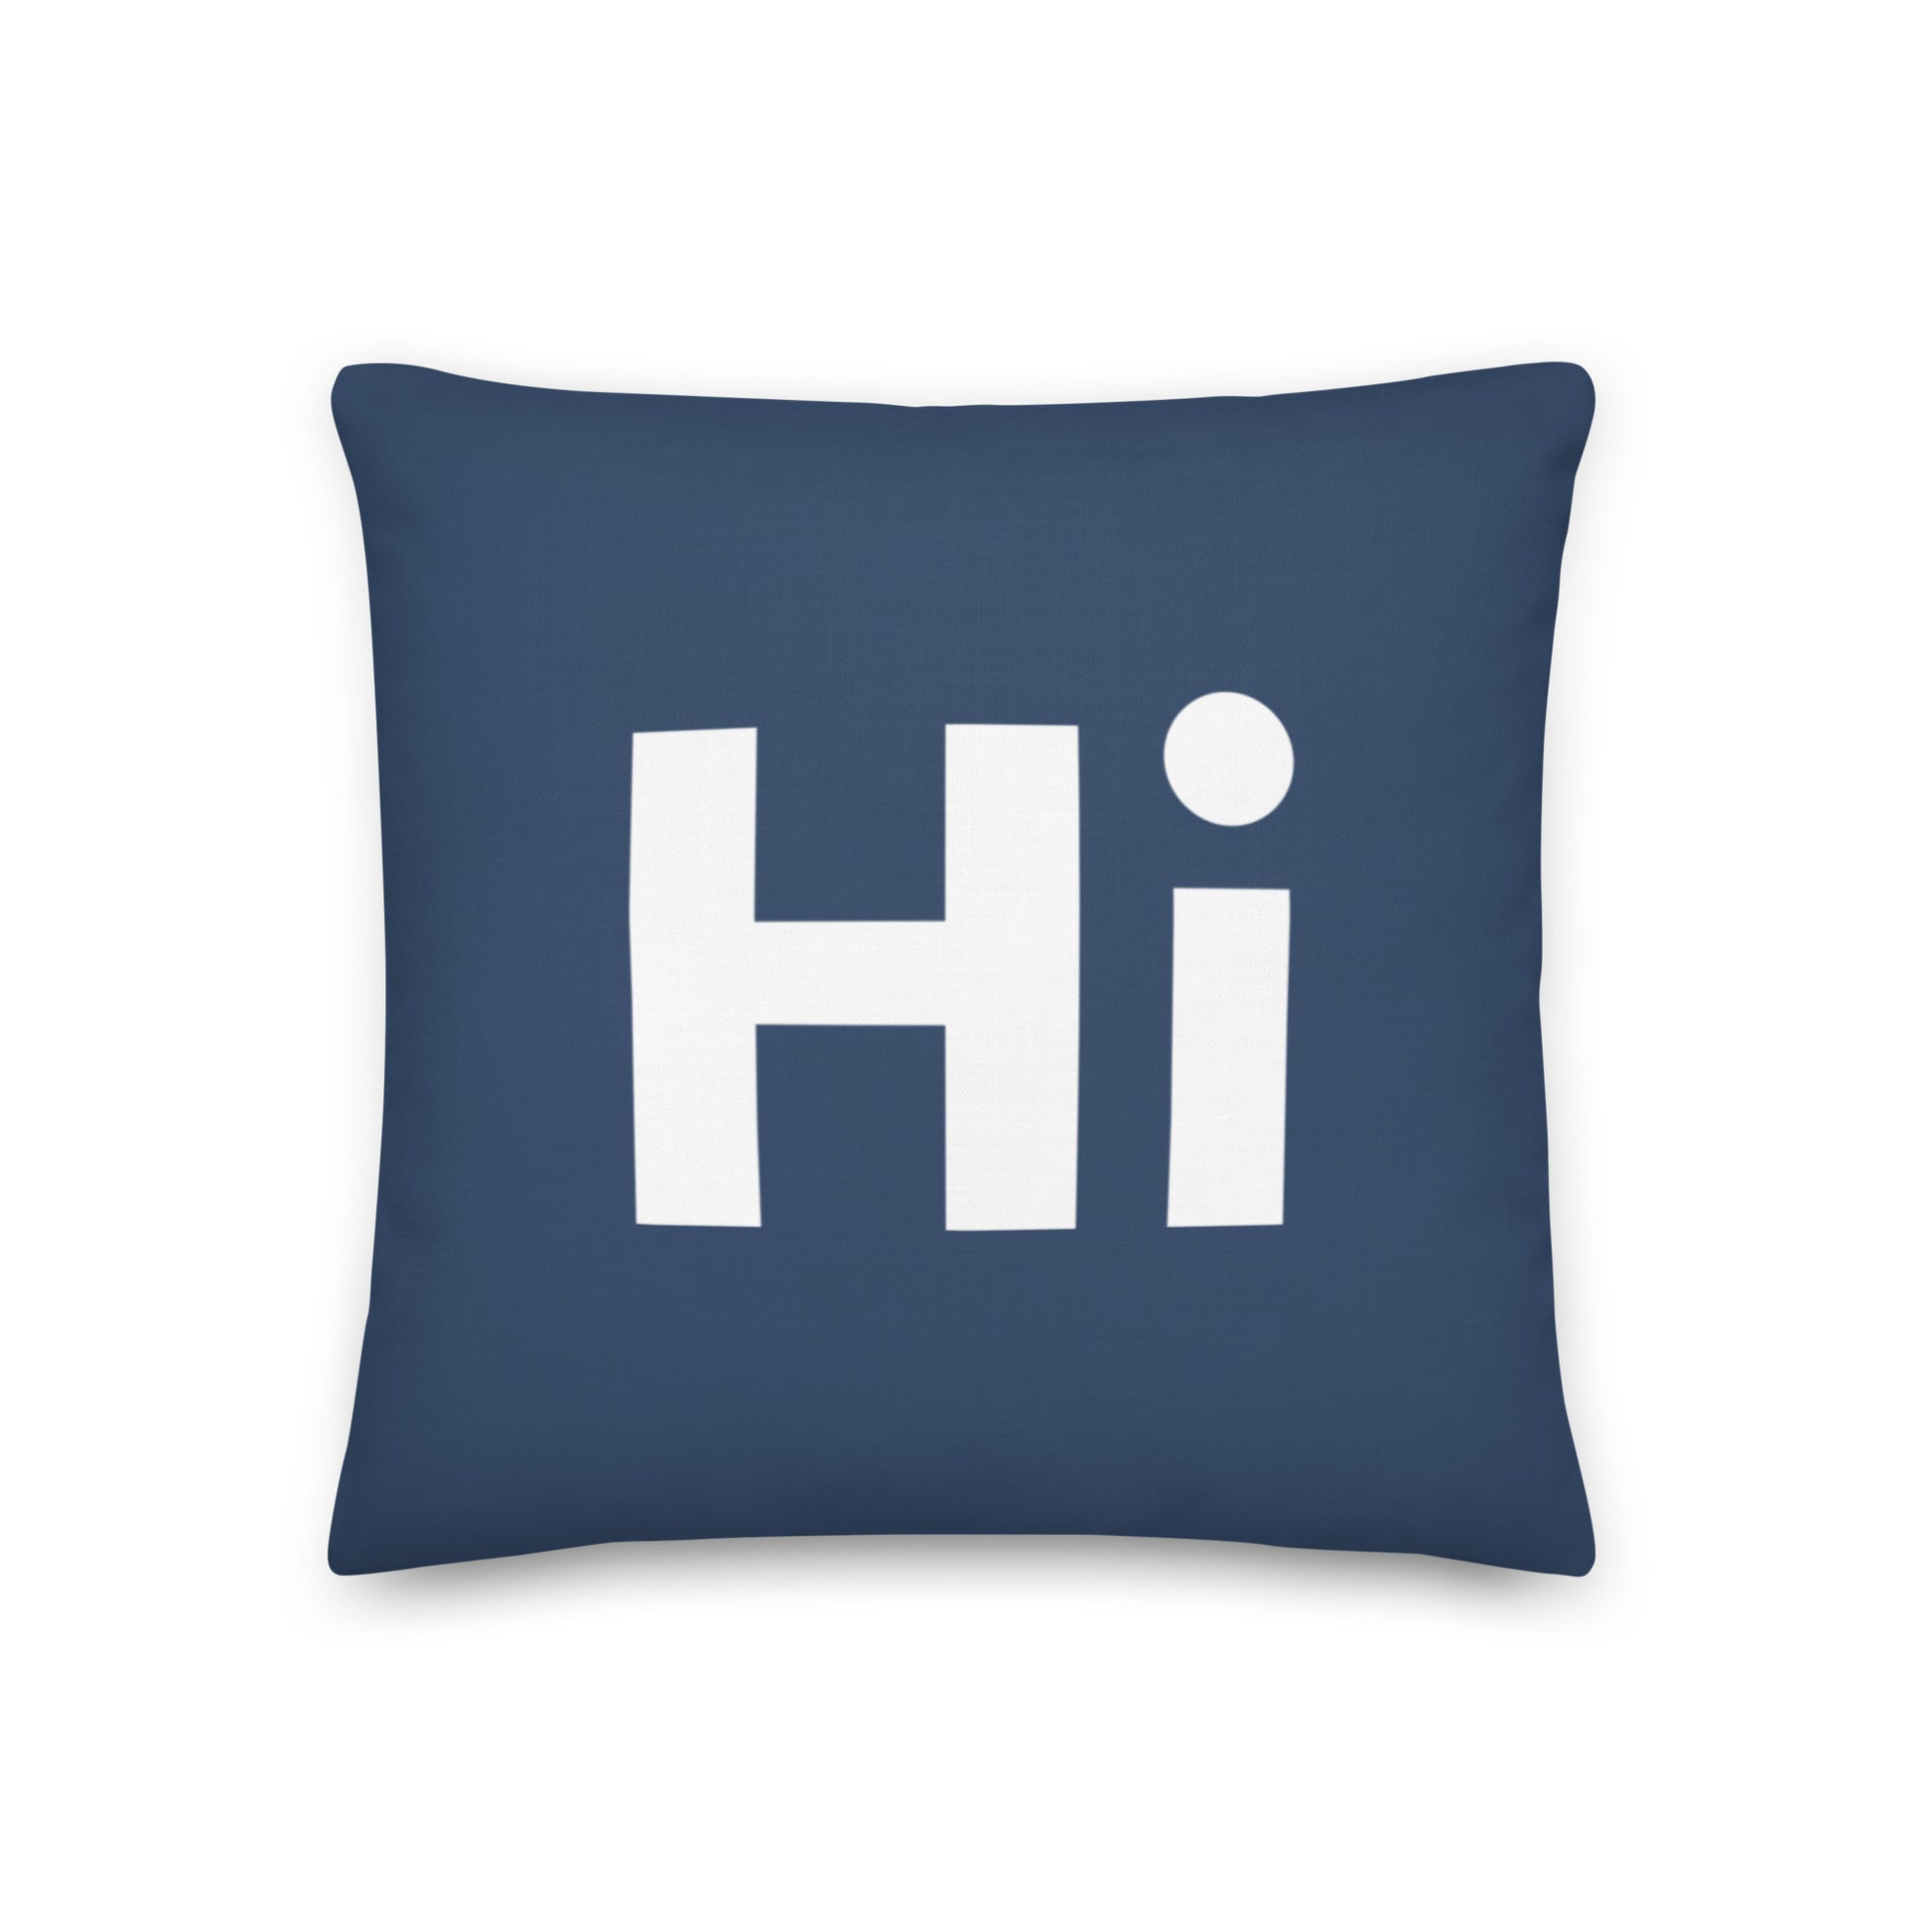 Hi Pillow in blue by HiJohnny.com